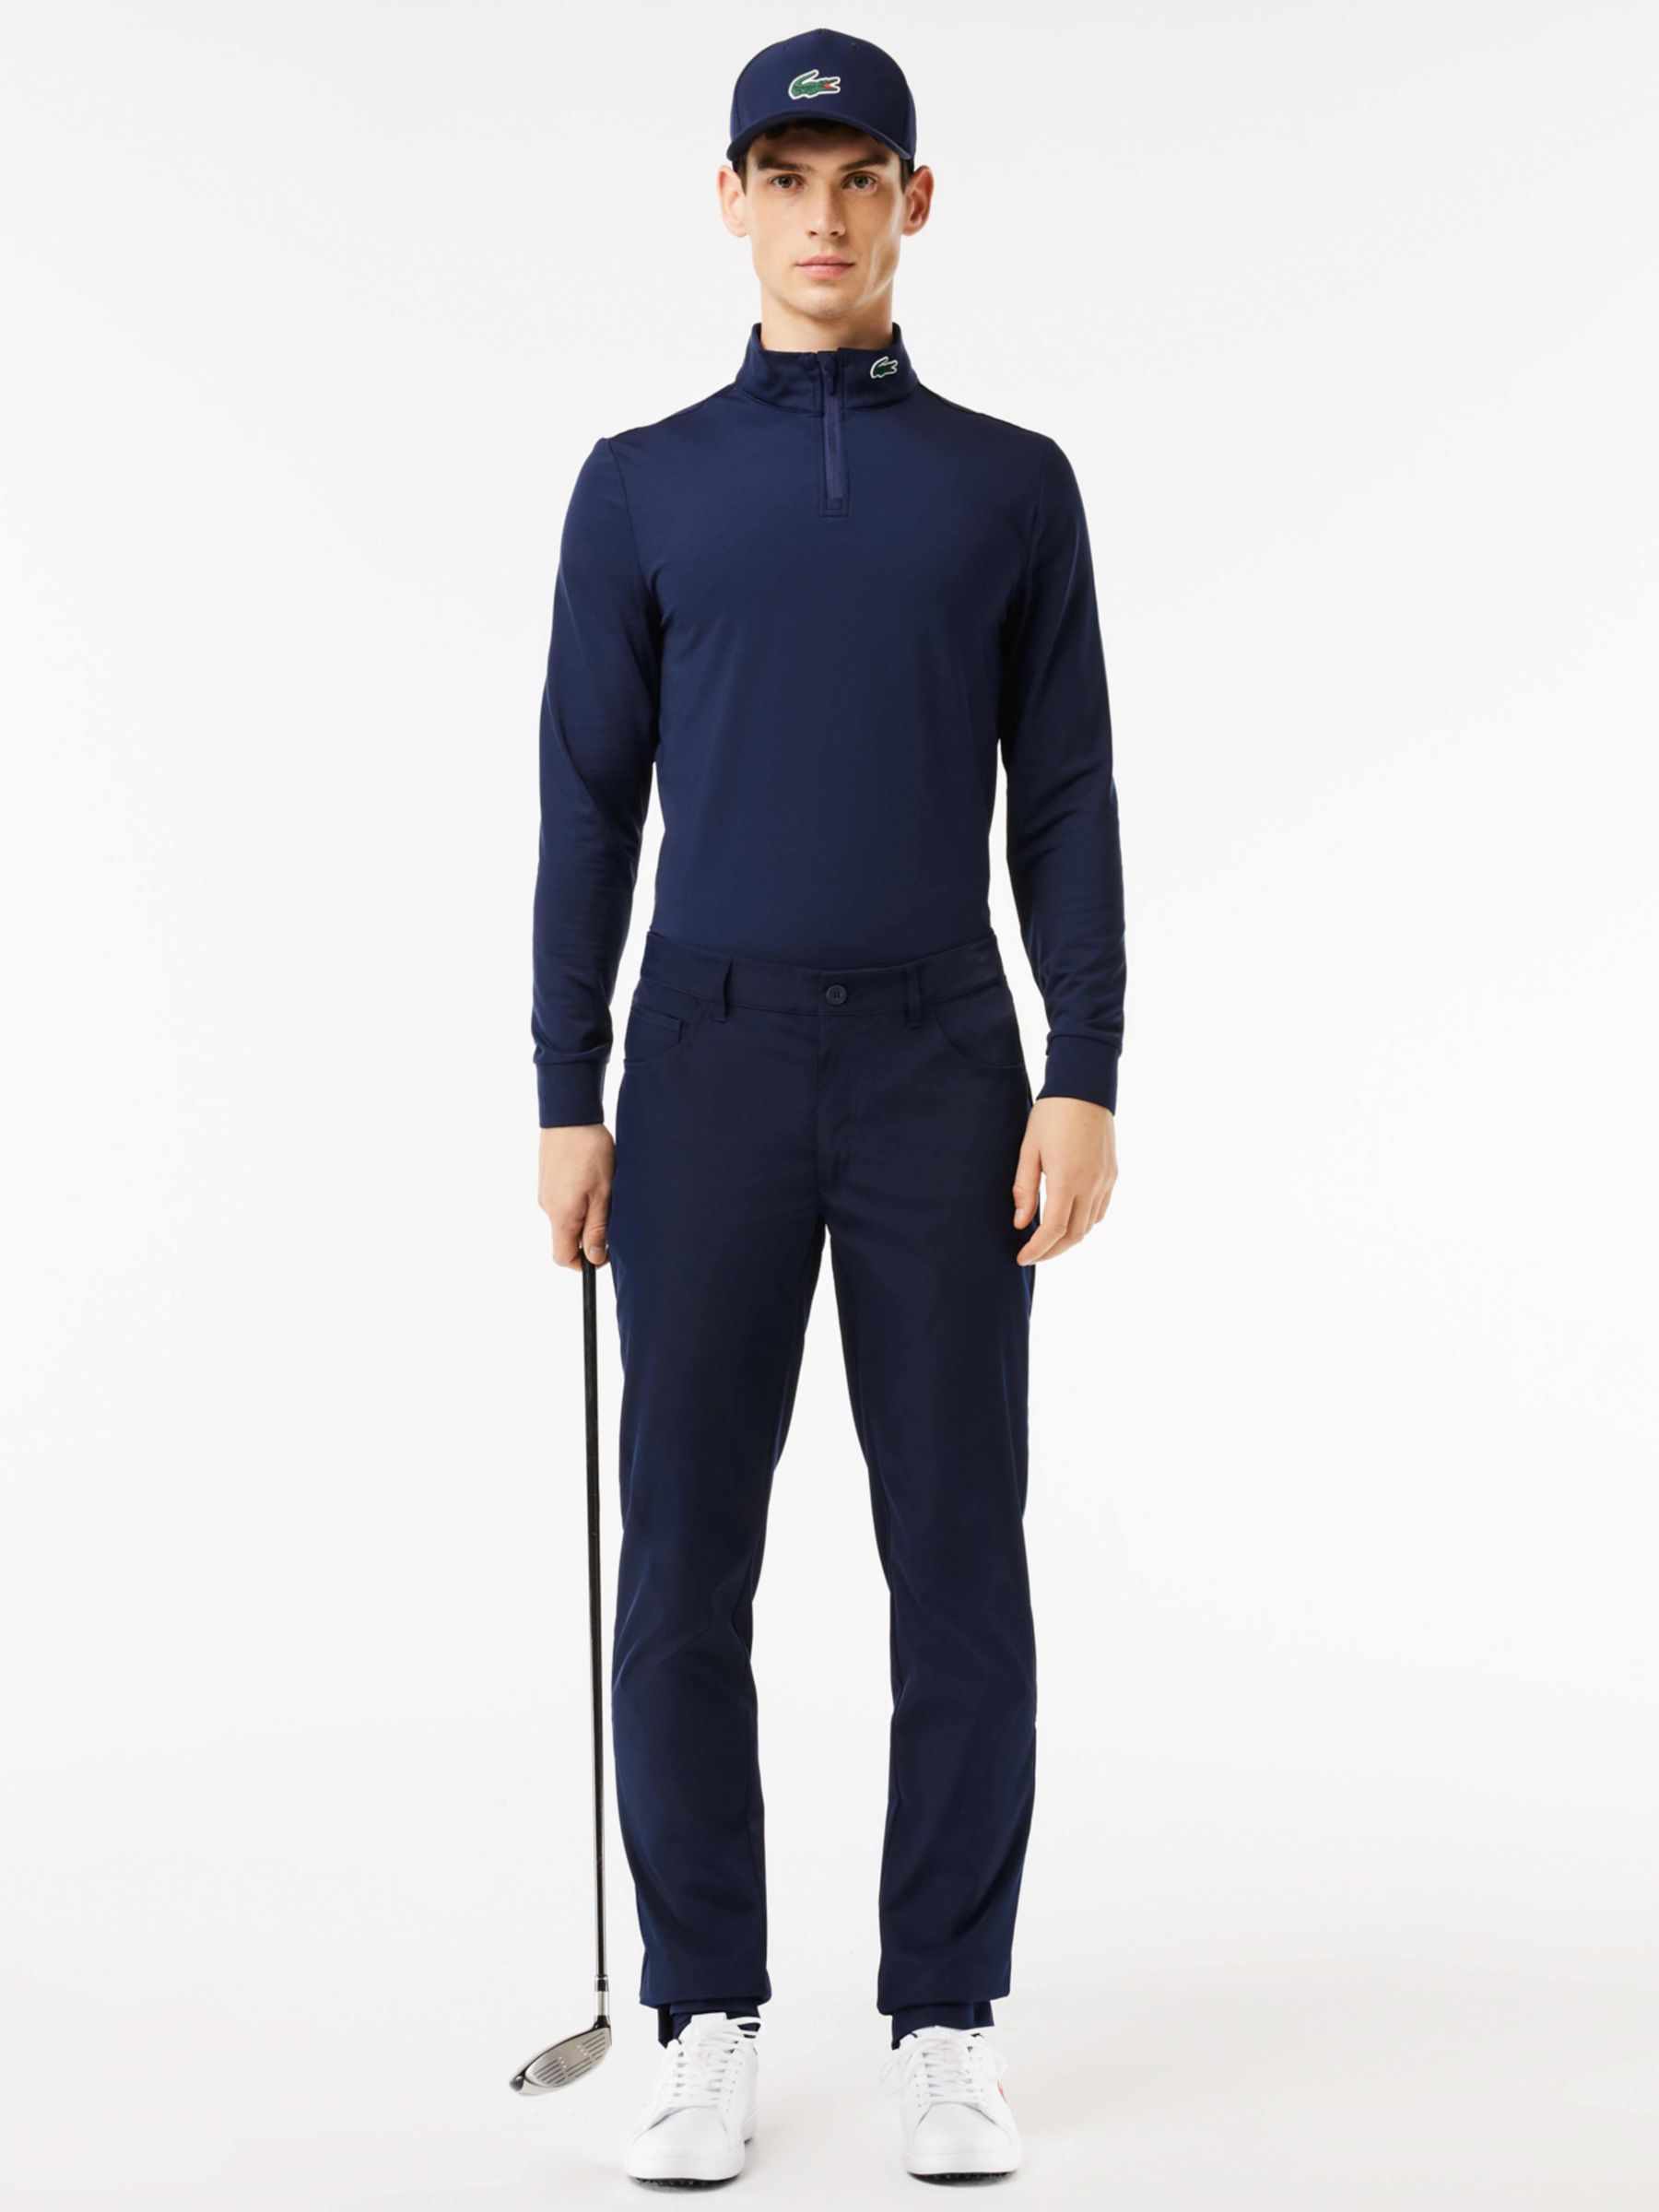 Buy Lacoste Gold Essentials Trousers, Navy Blue Online at johnlewis.com